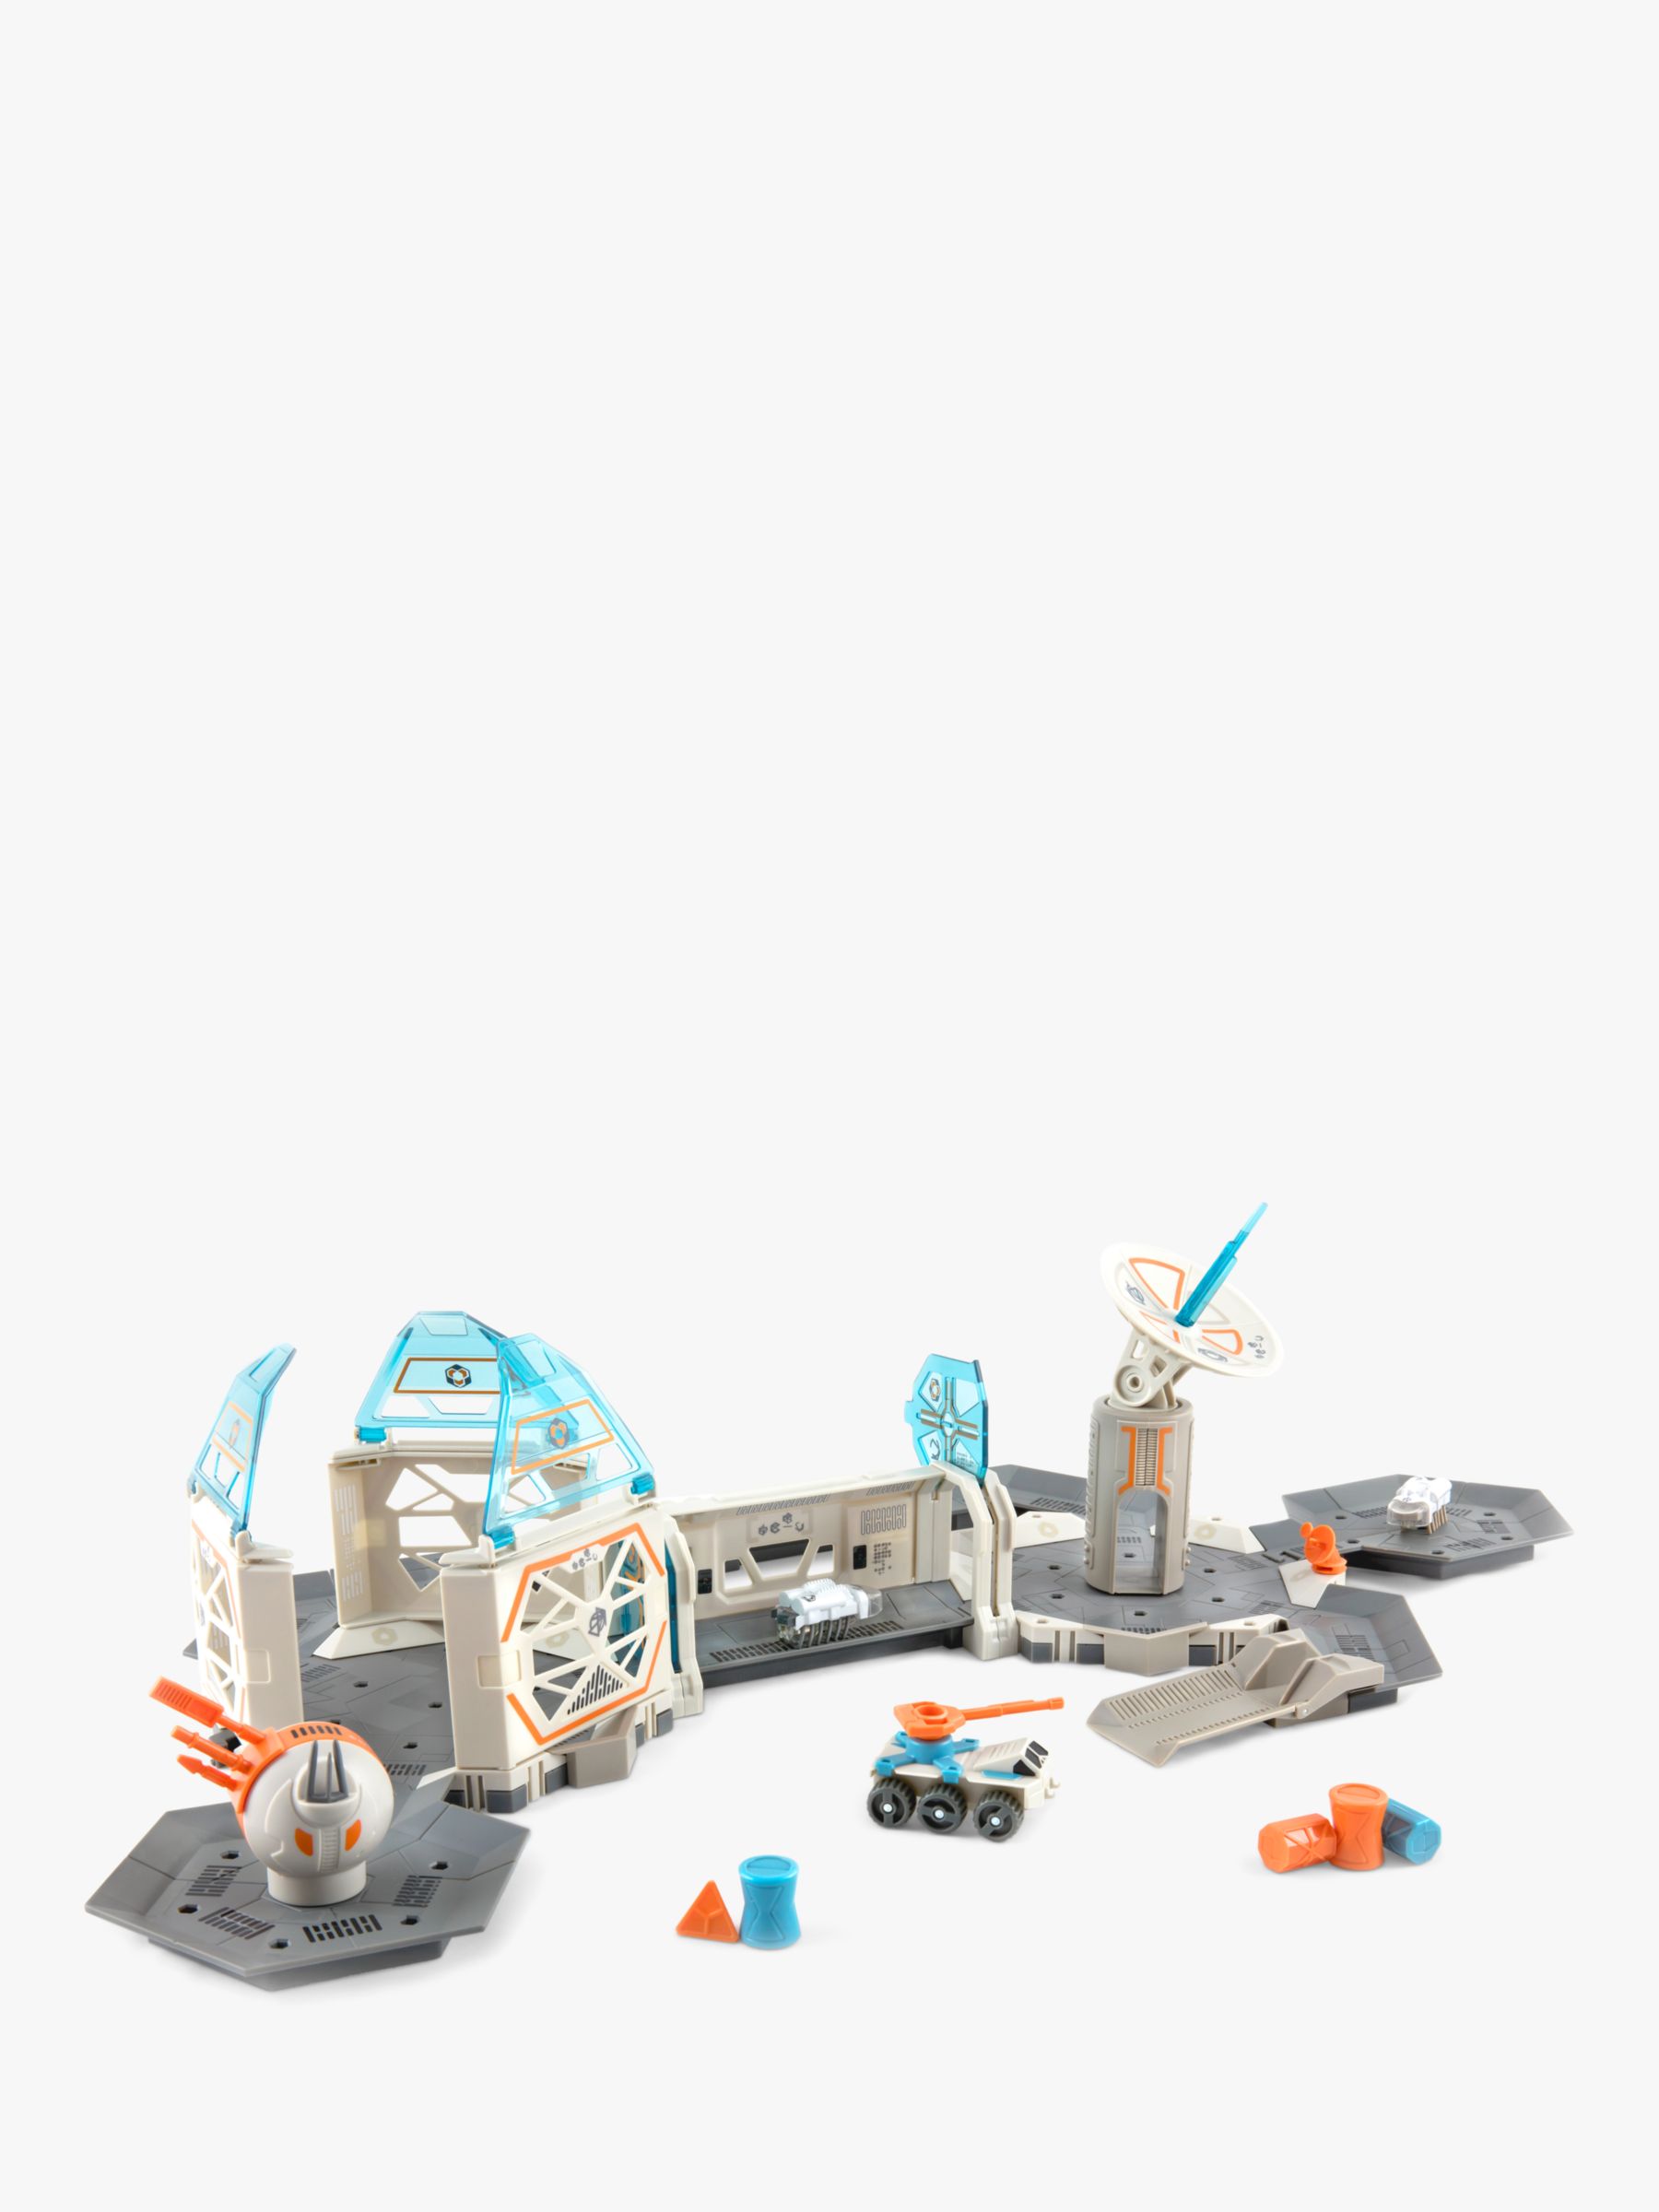 hexbug space discovery station